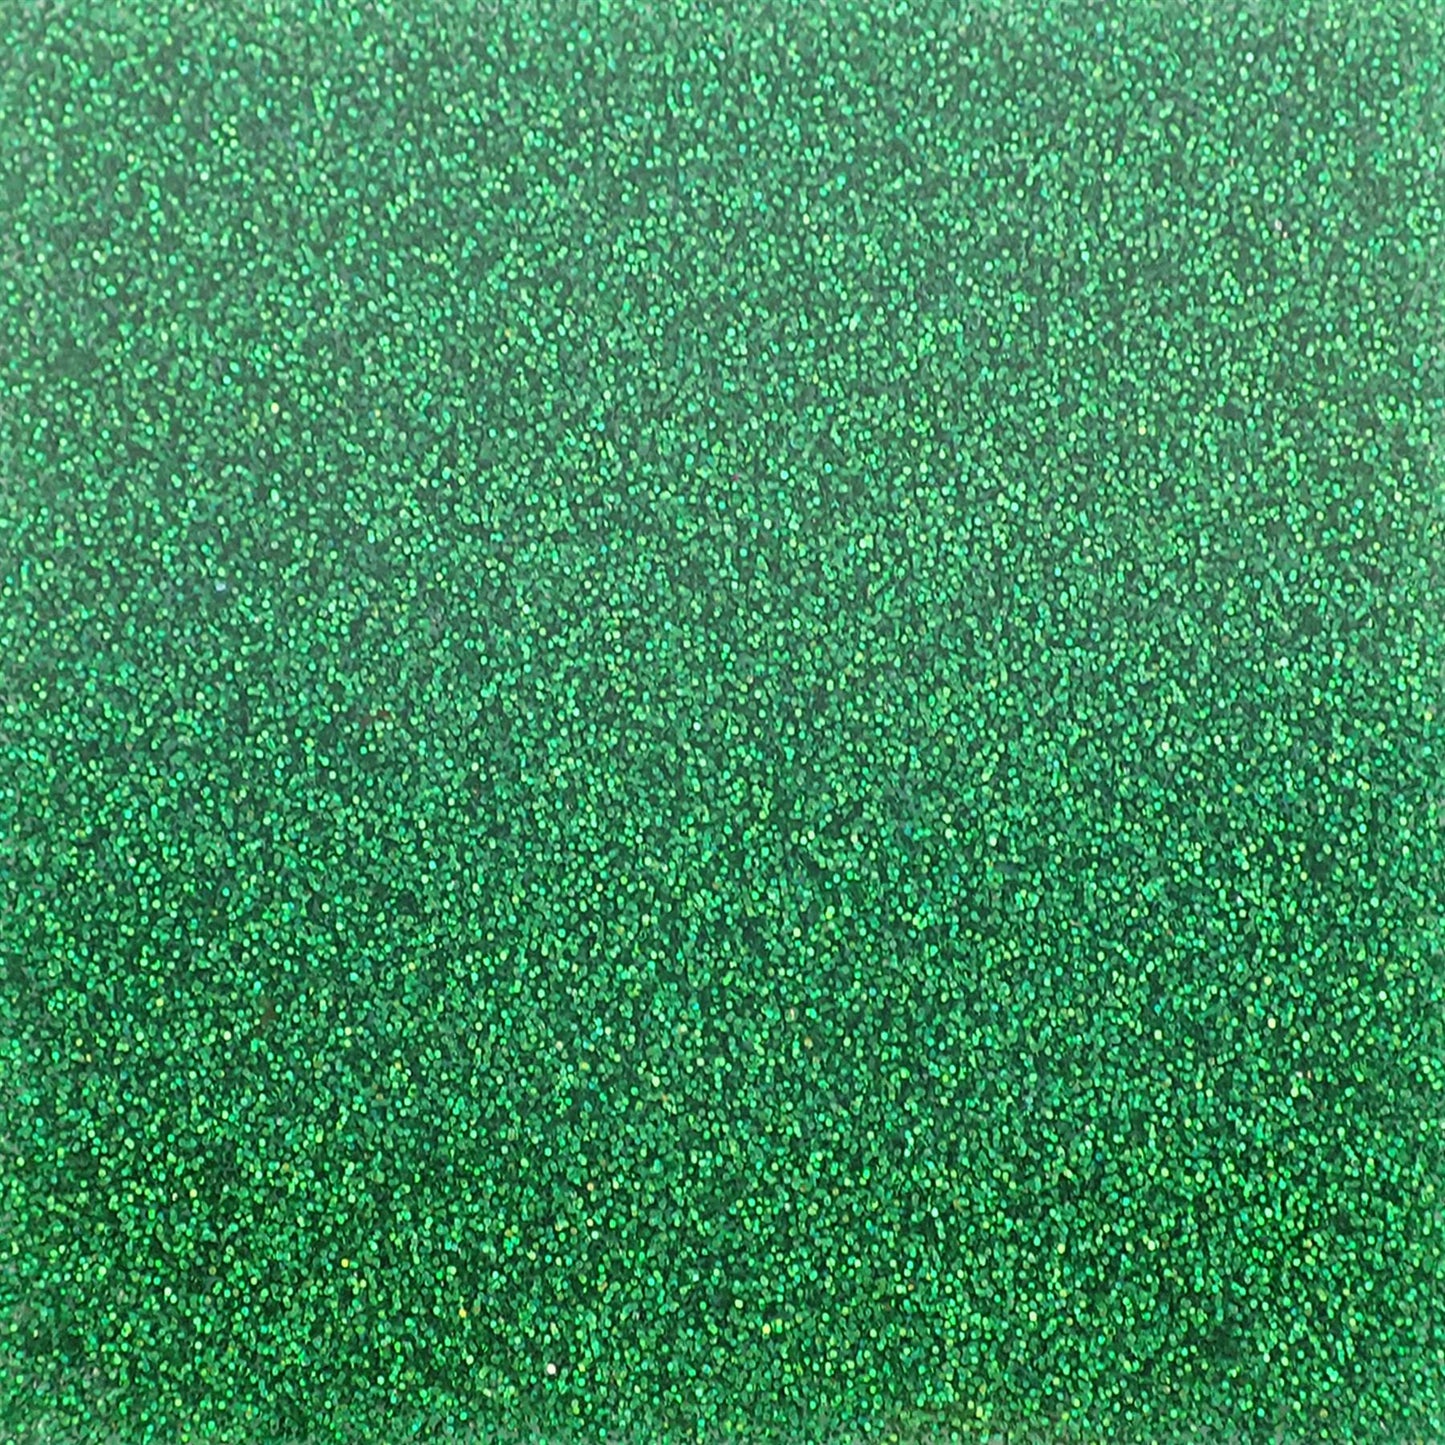 Incudo Grass Green 2-Sided Holographic Glitter Acrylic Sheet - 98x98x3mm (3.9x3.86x0.12"), Sample